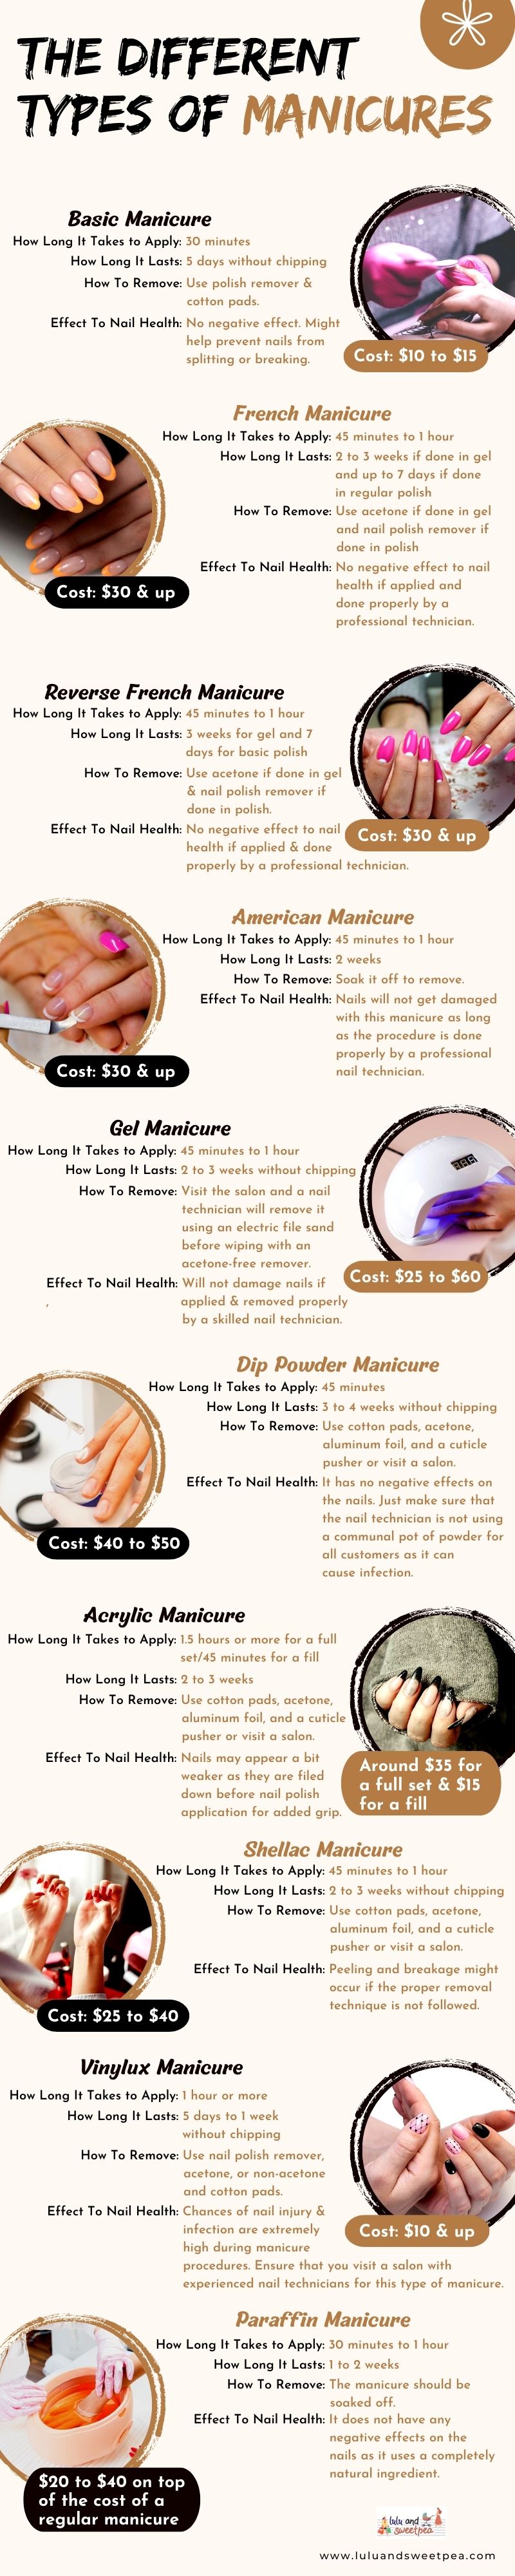 THE DIFFERENT TYPES OF MANICURES